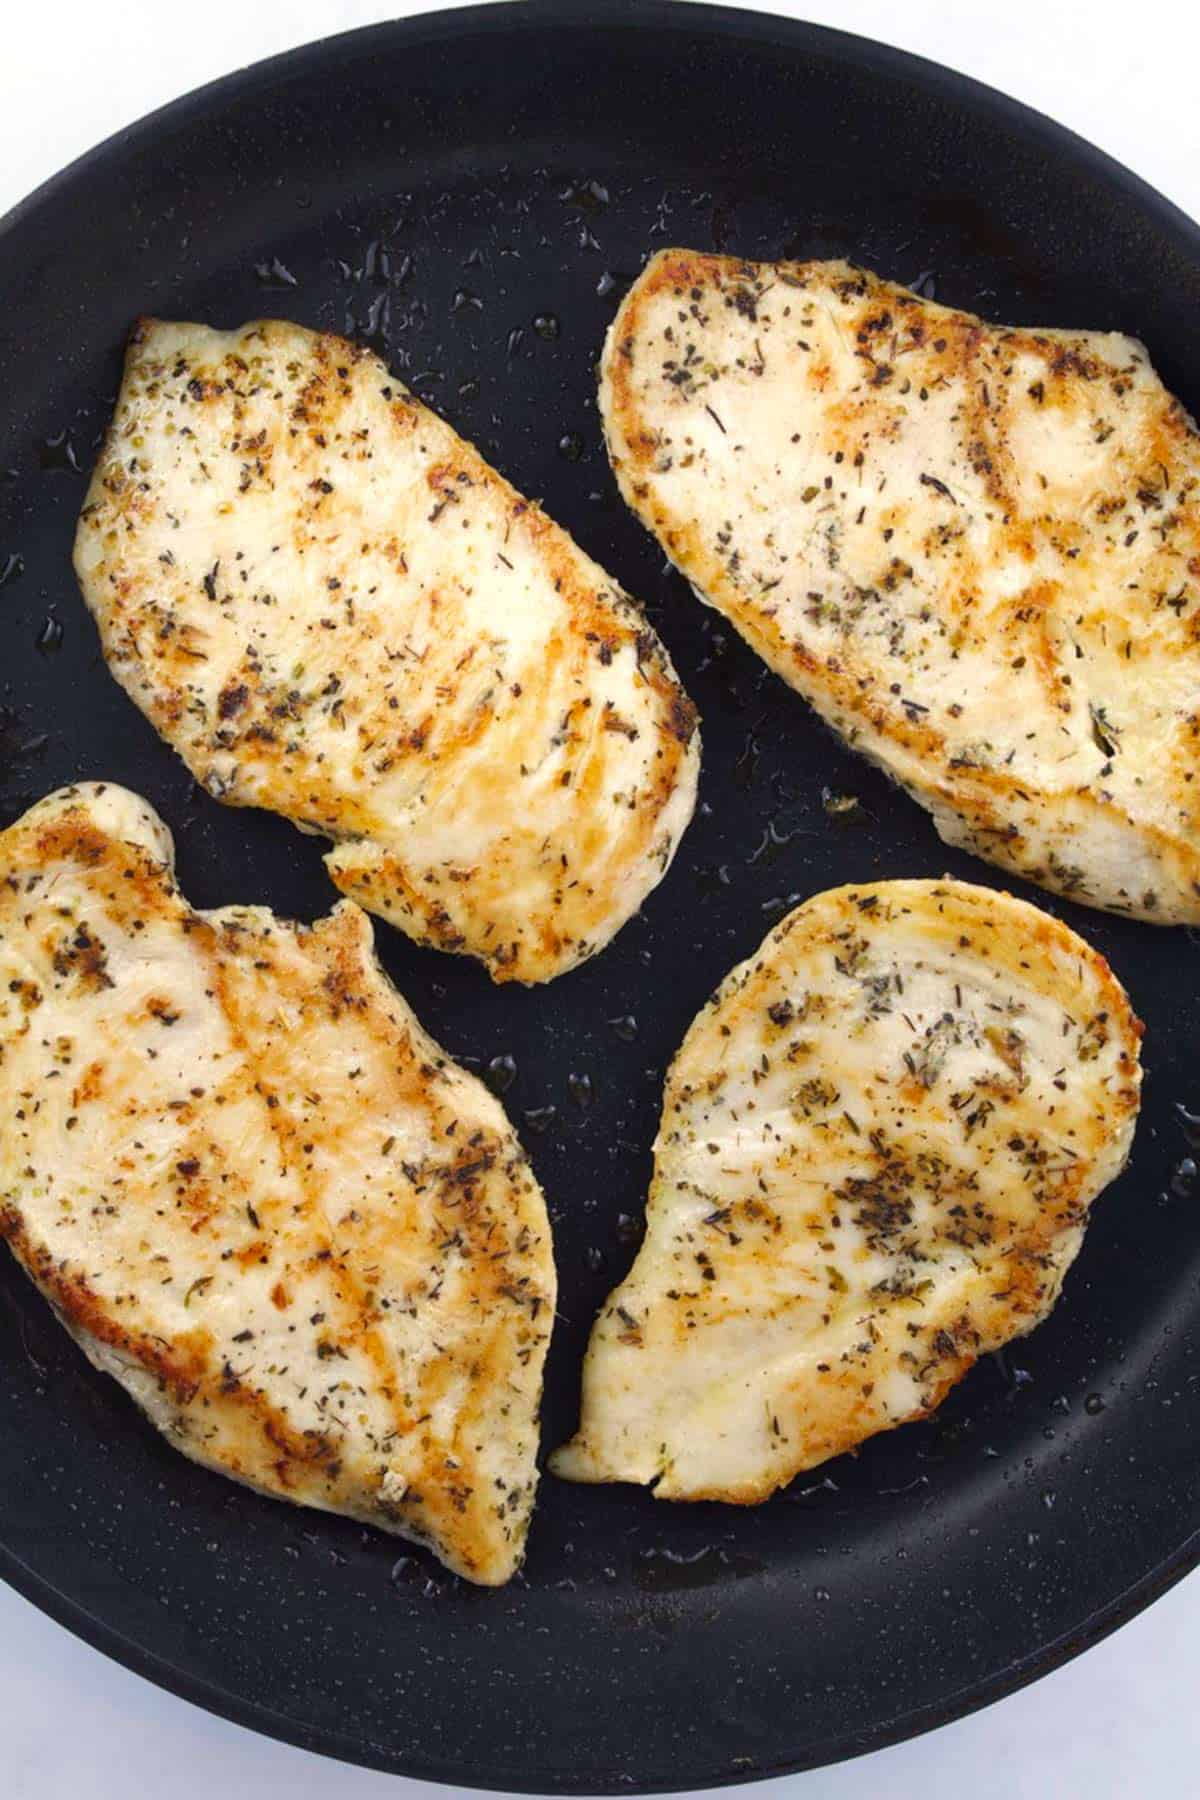 Overhead view of a black skillet with golden brown, seasoned chicken.